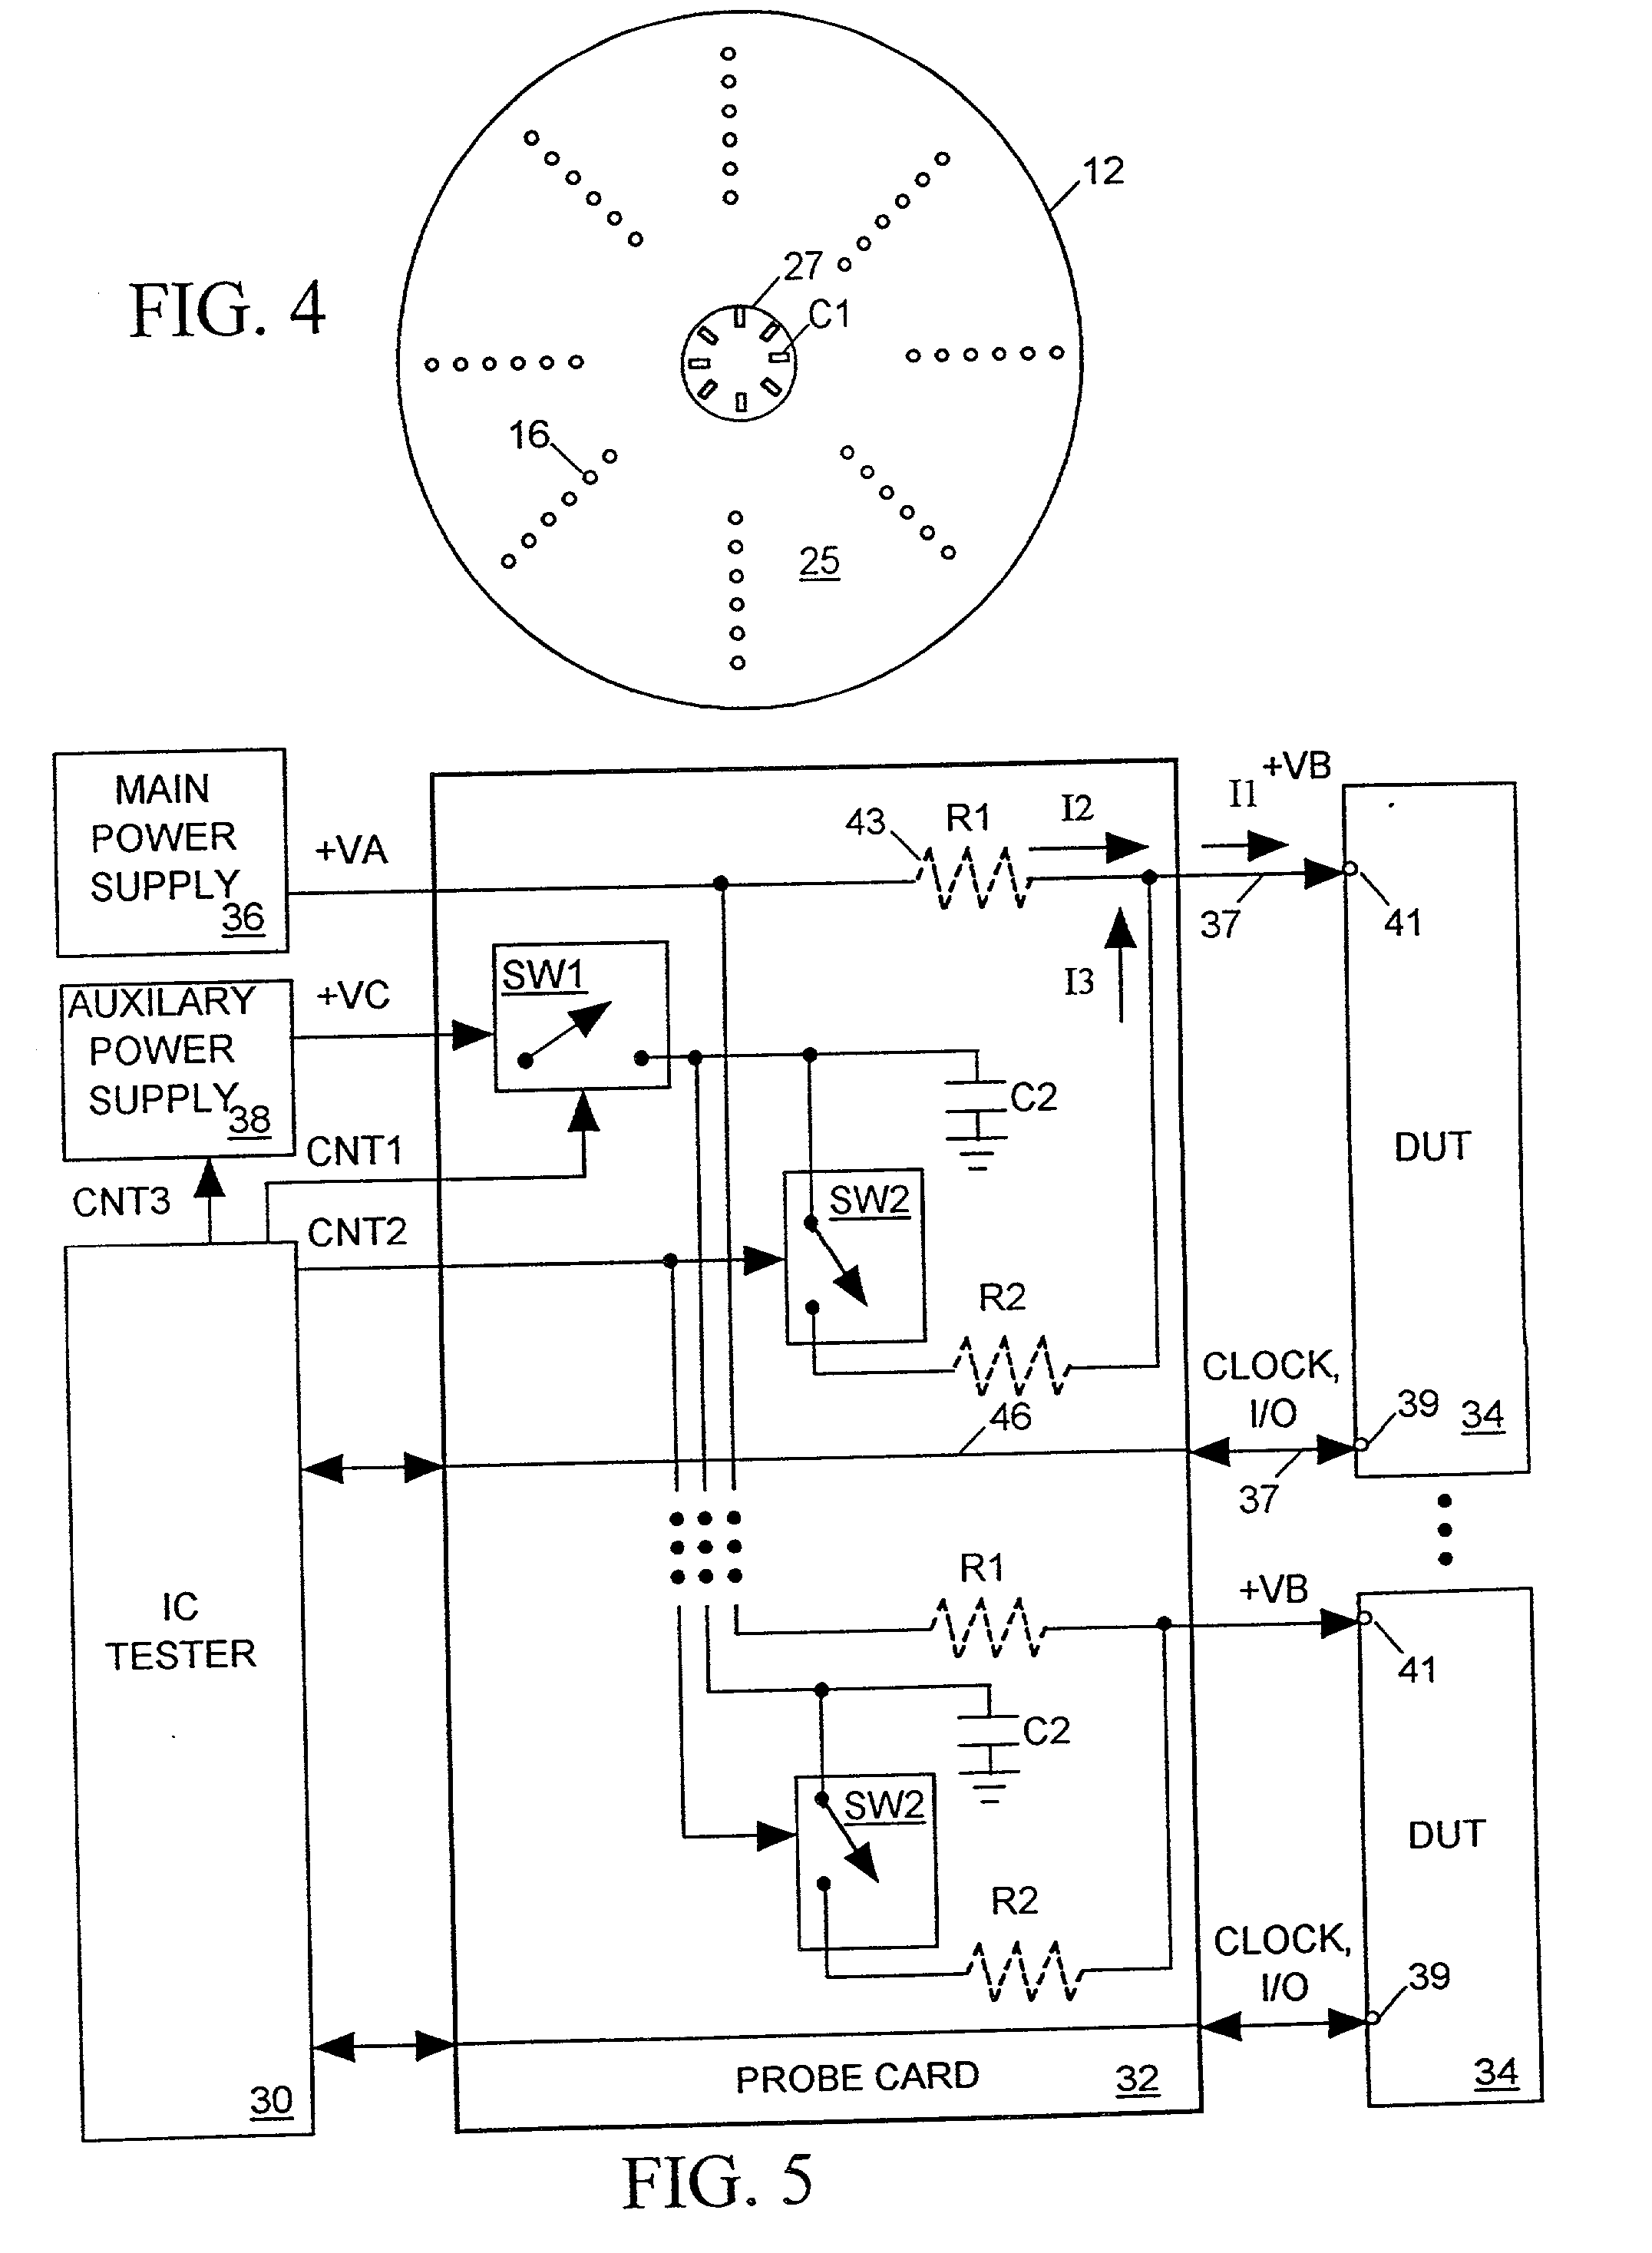 Apparatus for reducing power supply noise in an integrated circuit